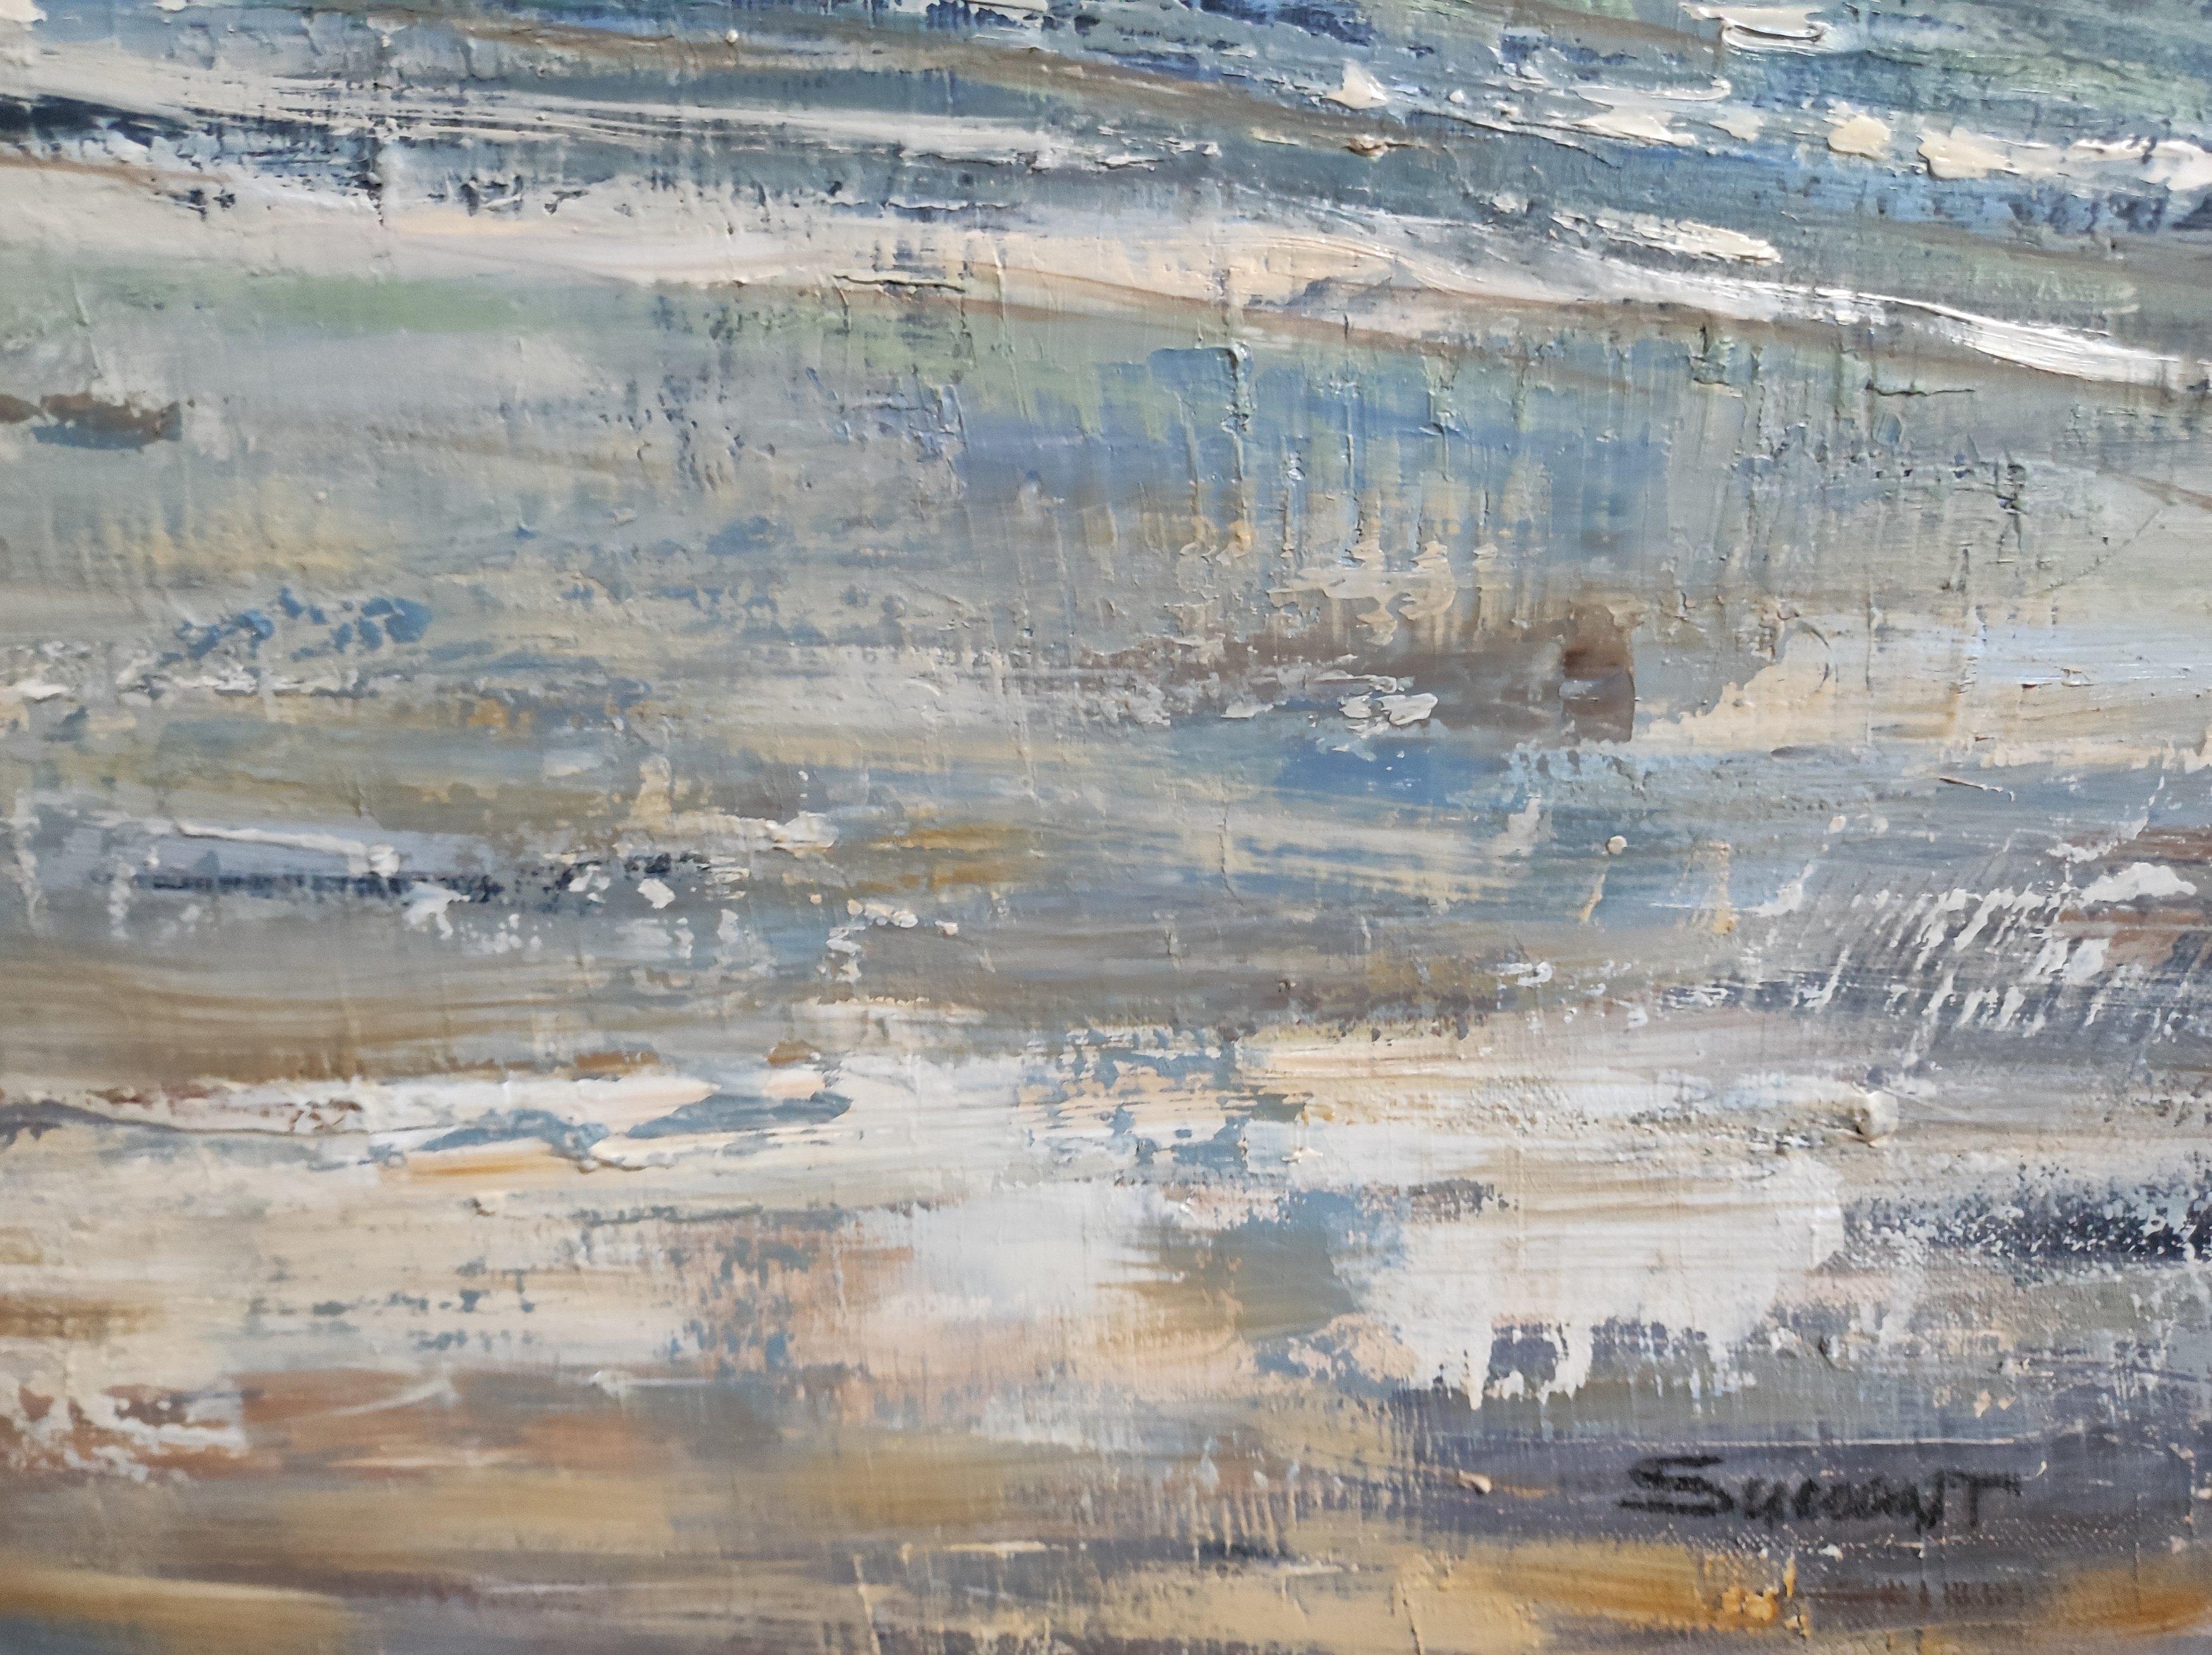 GRAY SKY, Marine, seaside, Oil on canvas, Semi-abstract, Blue, Impressionism - Abstract Impressionist Painting by SOPHIE DUMONT